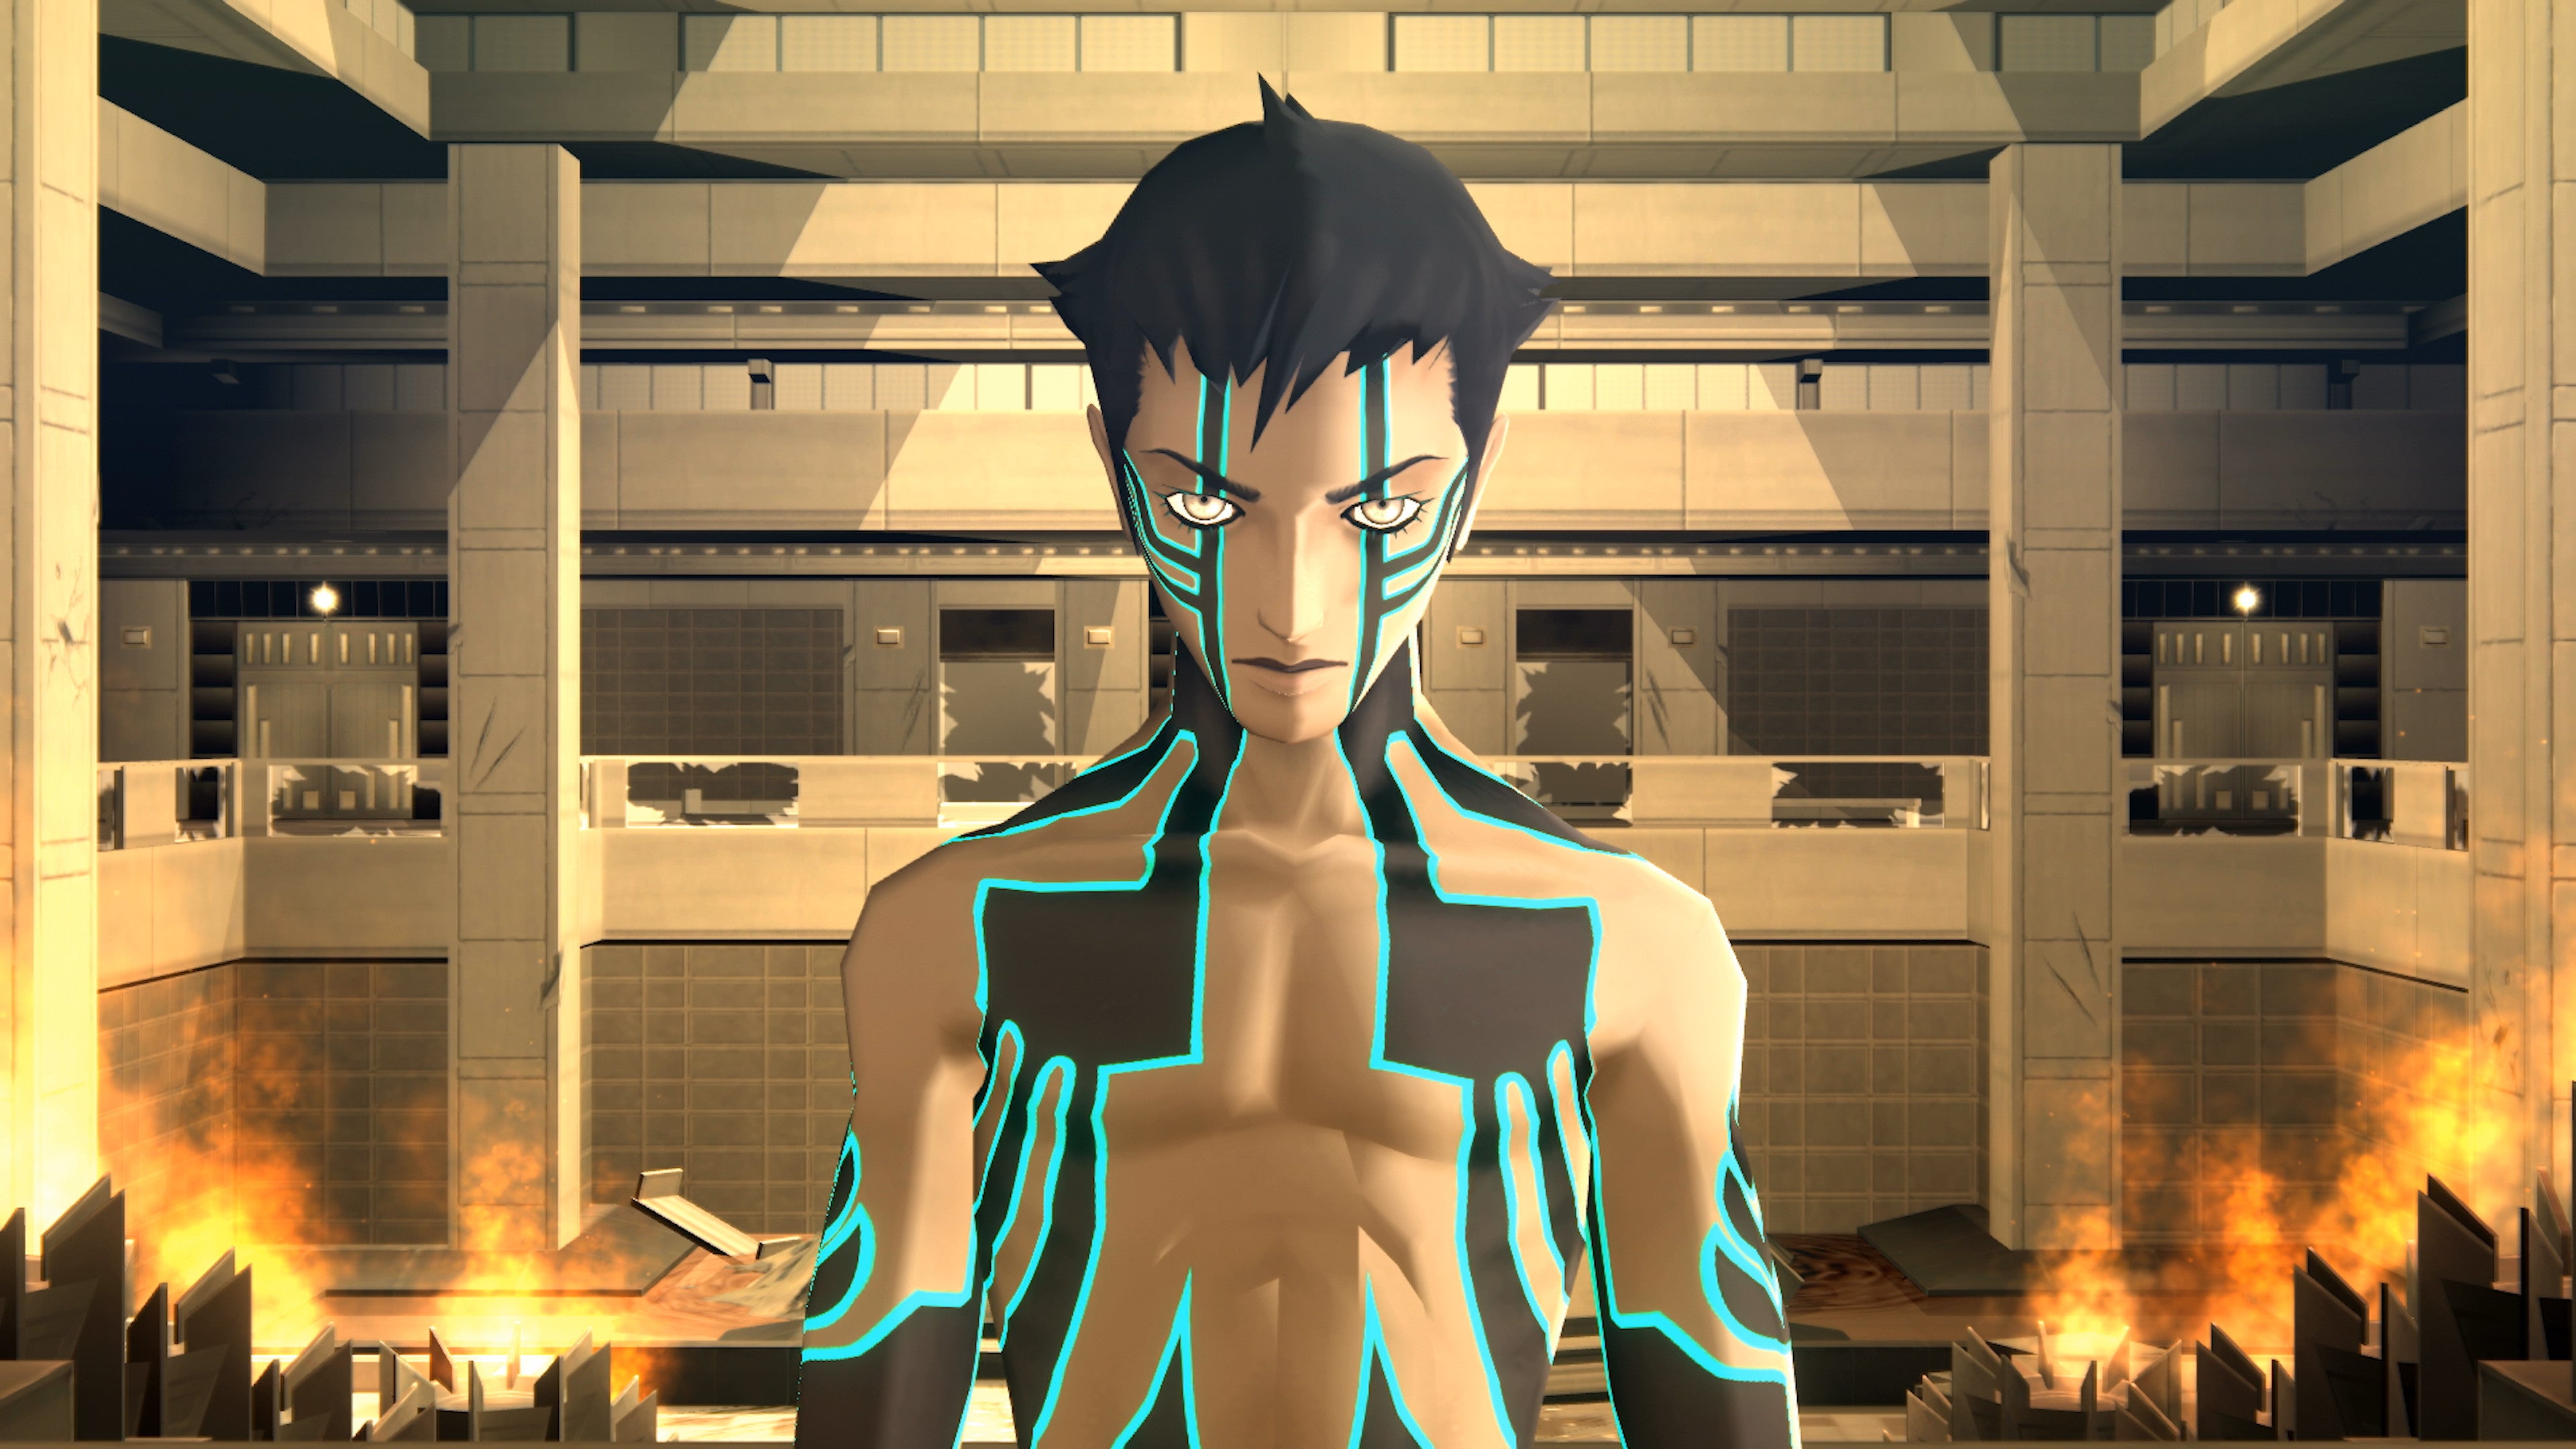 Shin Megami Tensei III: Nocturne HD Remaster is out now.